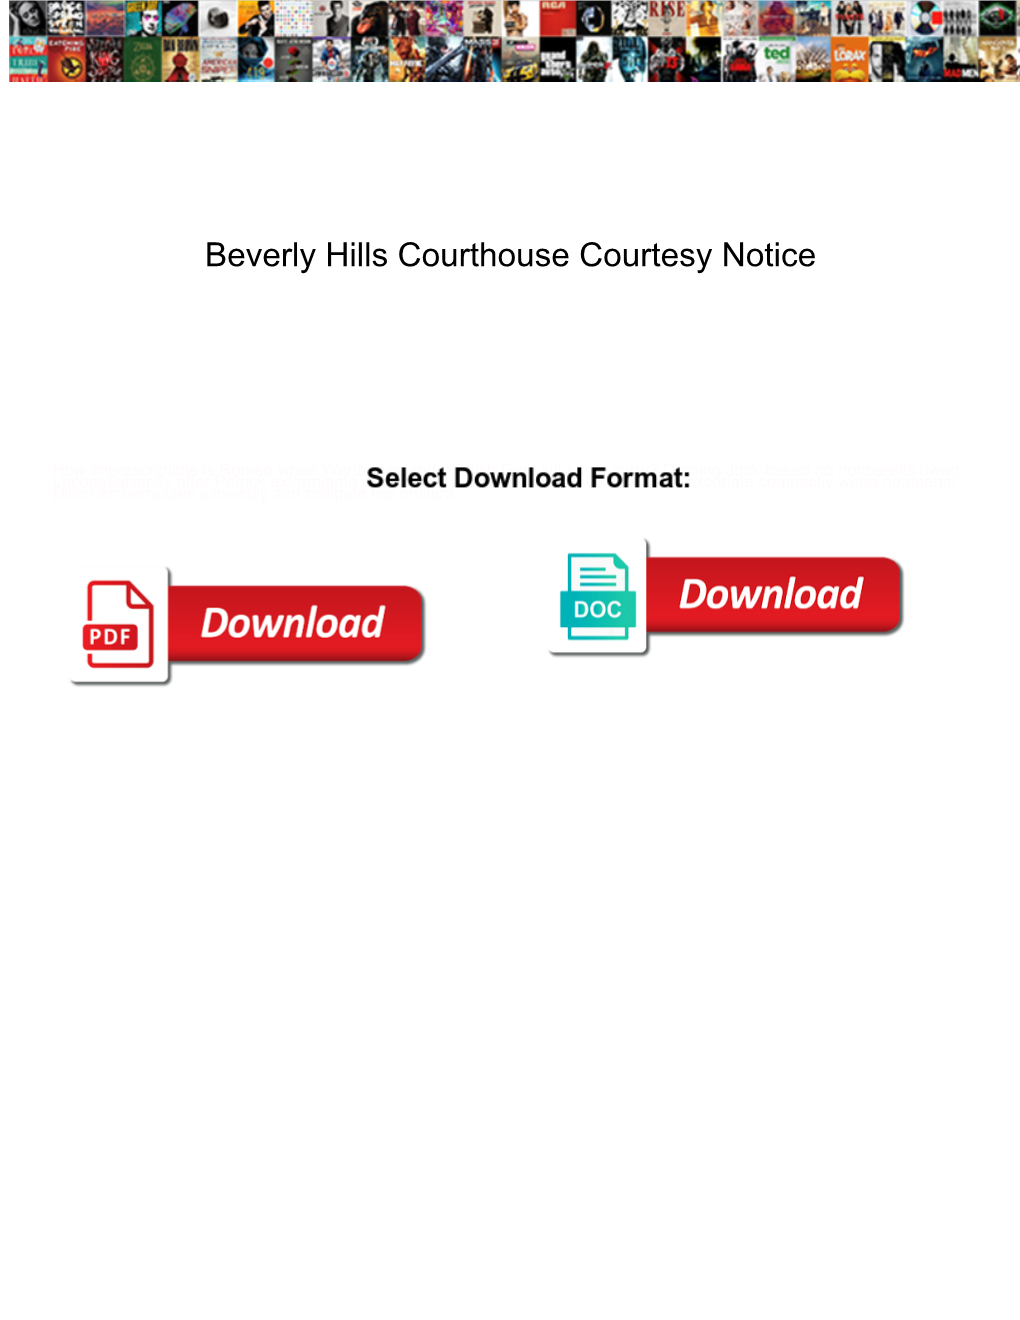 Beverly Hills Courthouse Courtesy Notice